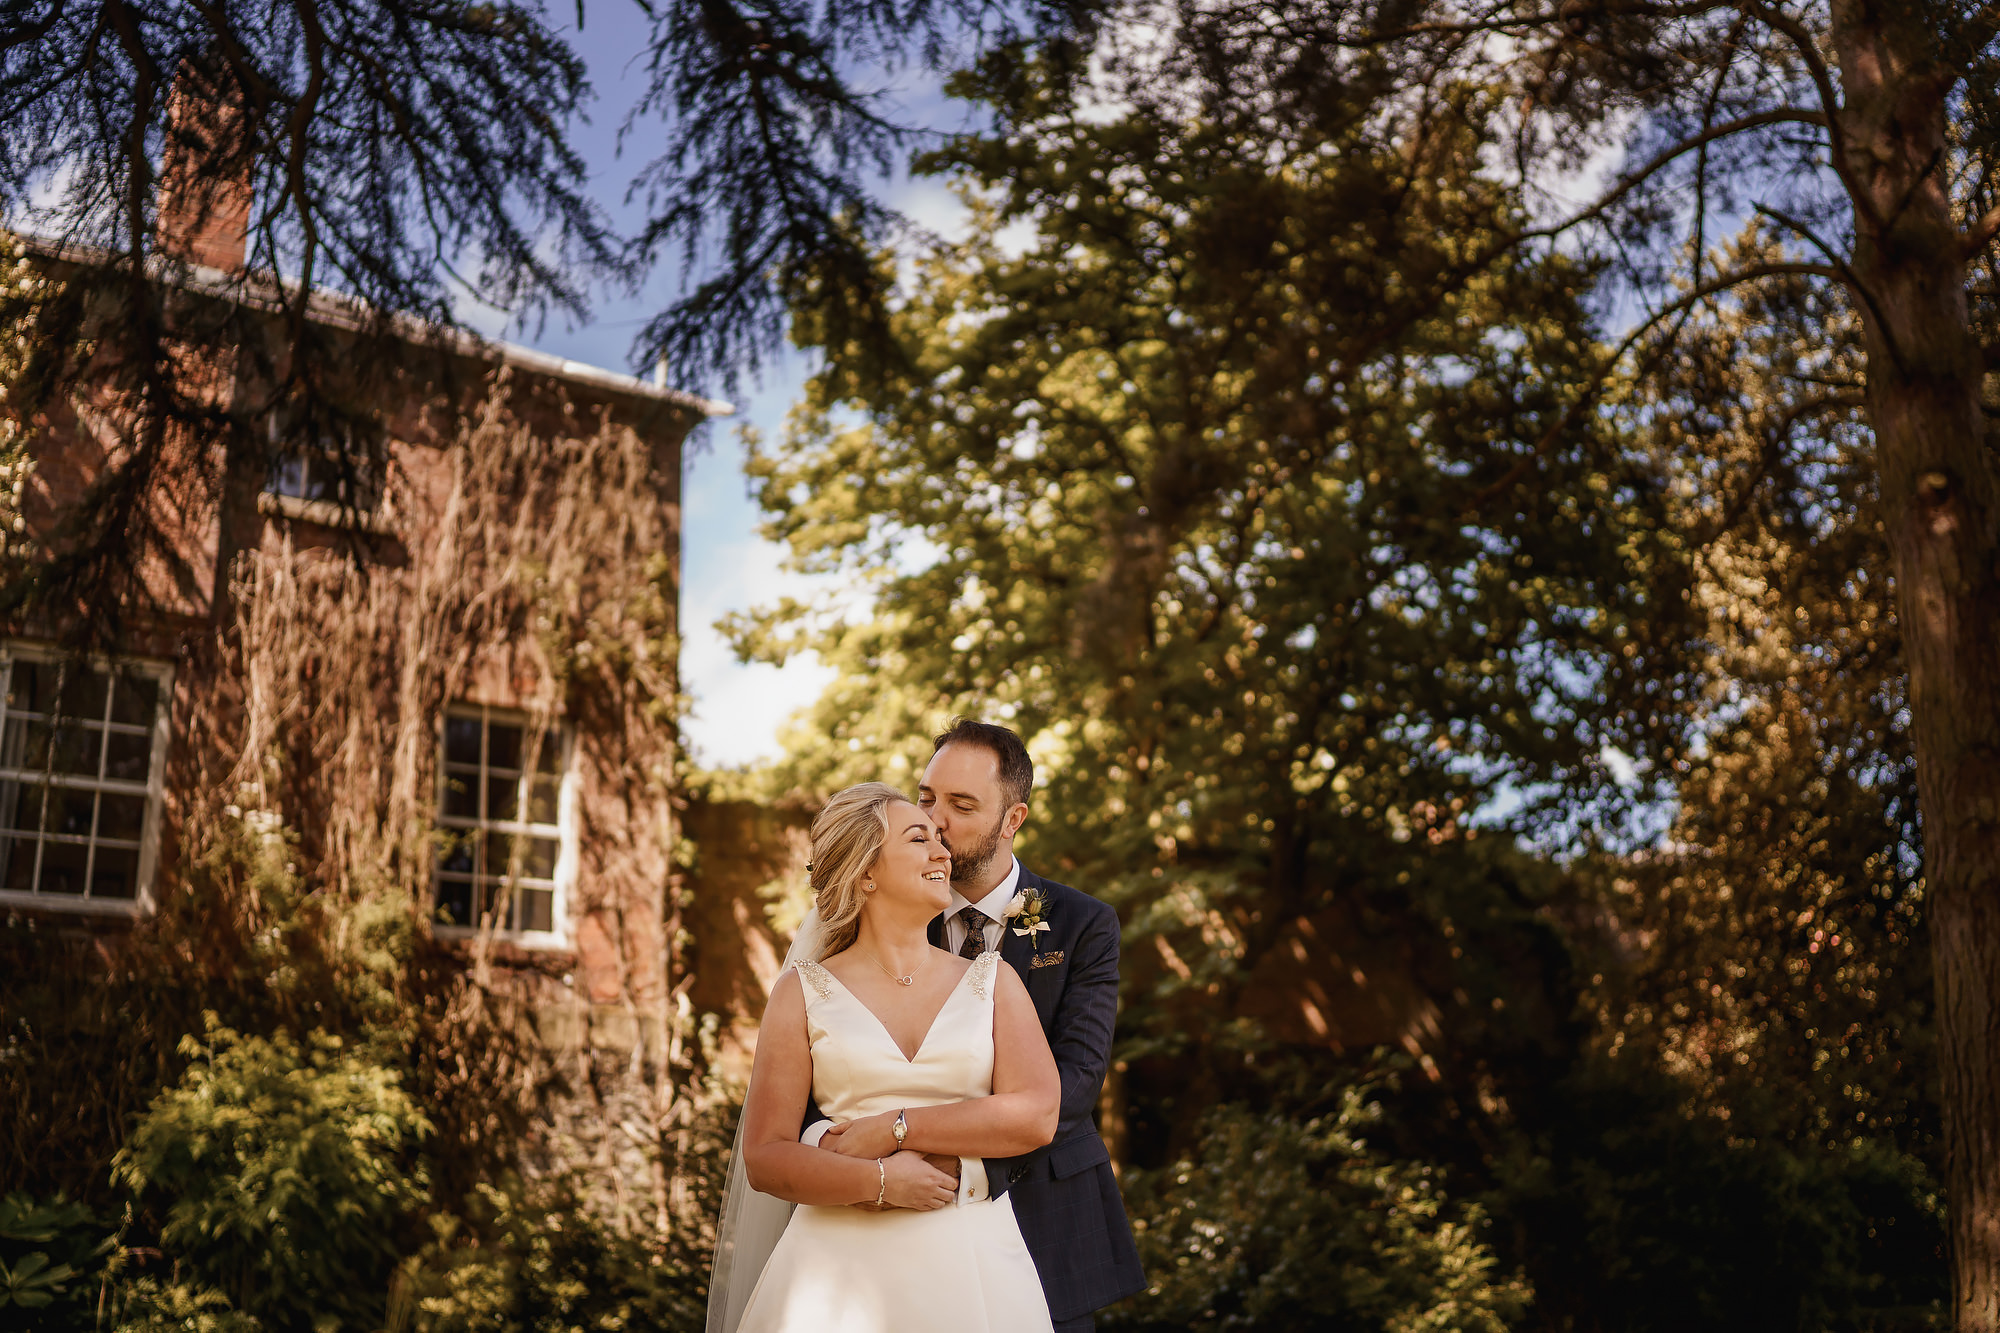 Walcot hall summer wedding - personality packed documentary wedding photography by arj photography cheshire